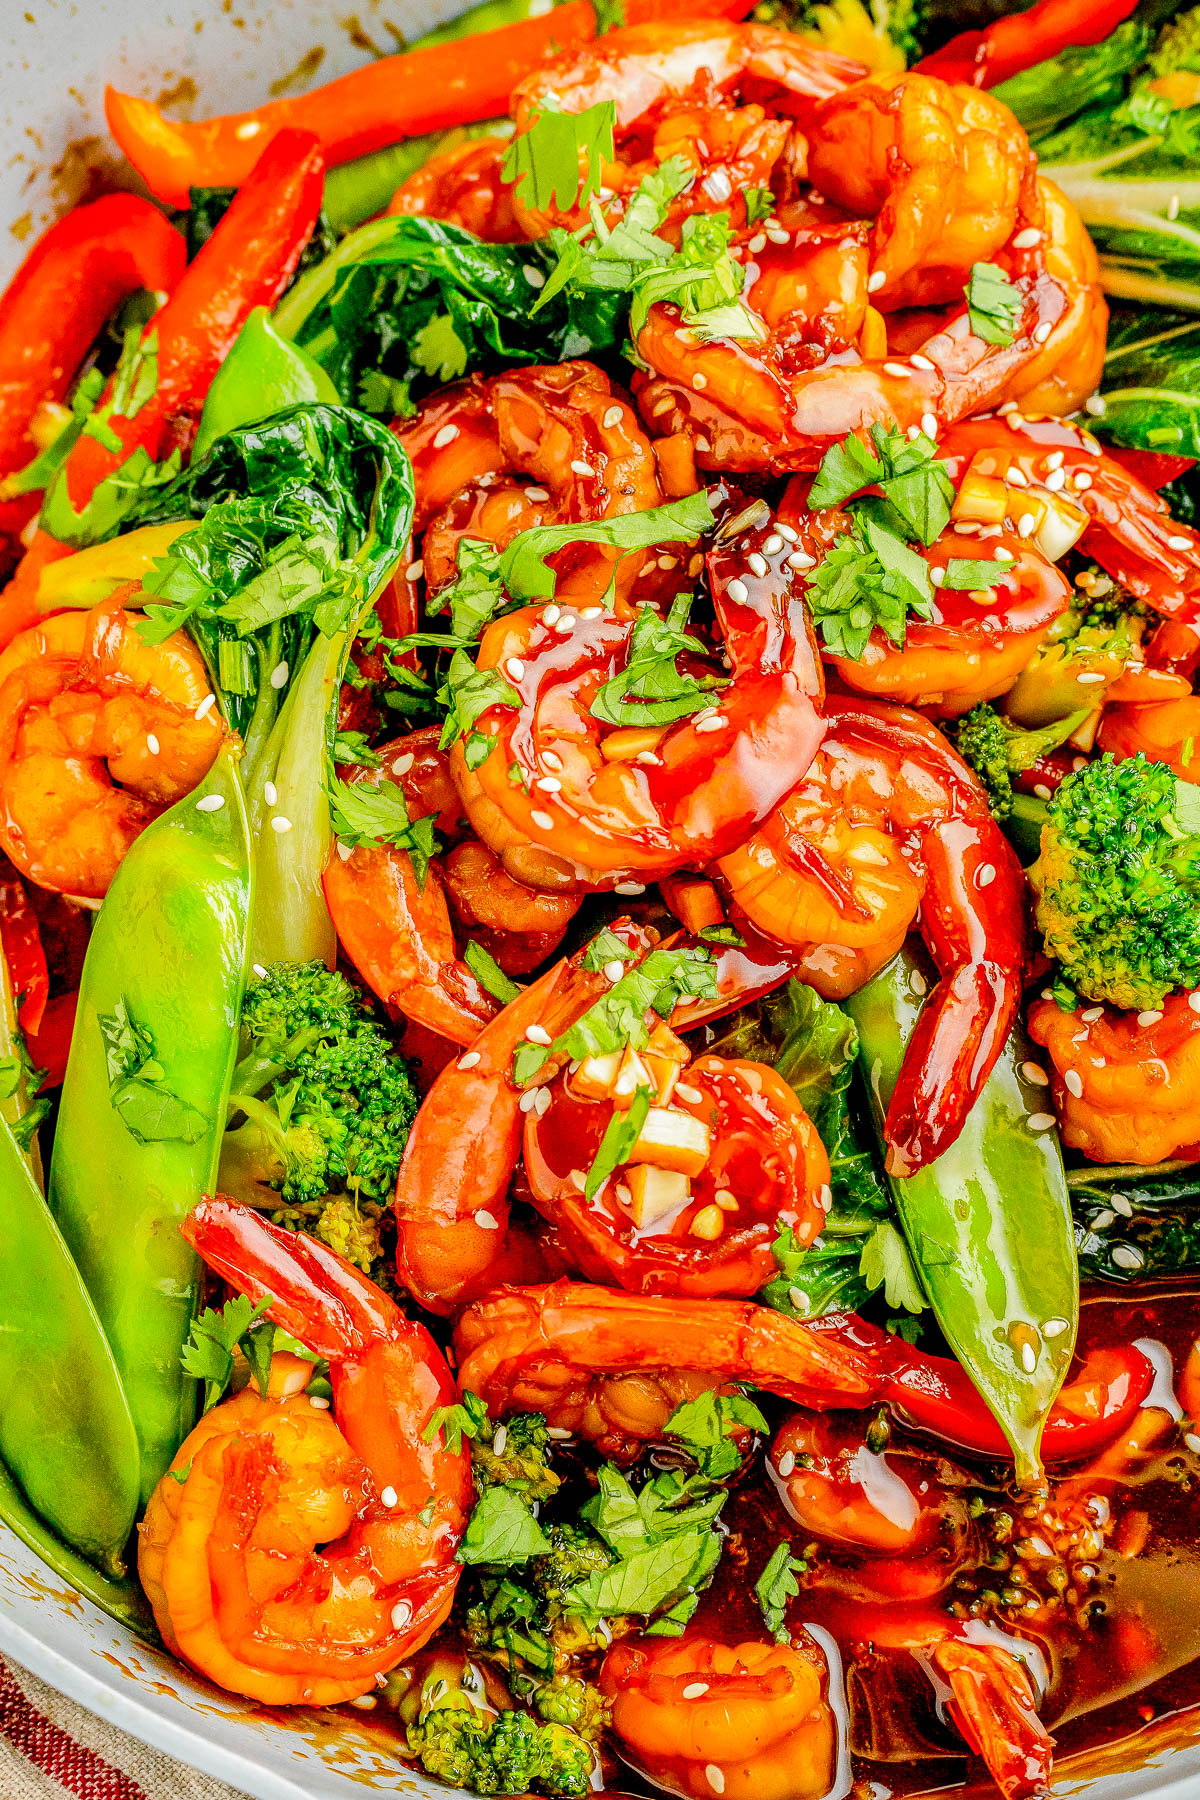 Garlic Shrimp Stir-Fry — Made with juicy shrimp, crisp-tender veggies, and a homemade stir-fry sauce, this stir-fry is QUICK and EASY! It’s ready in just 25 minutes and tastes so much better than takeout! Serve the stir-fry with noodles or rice for a complete meal. 